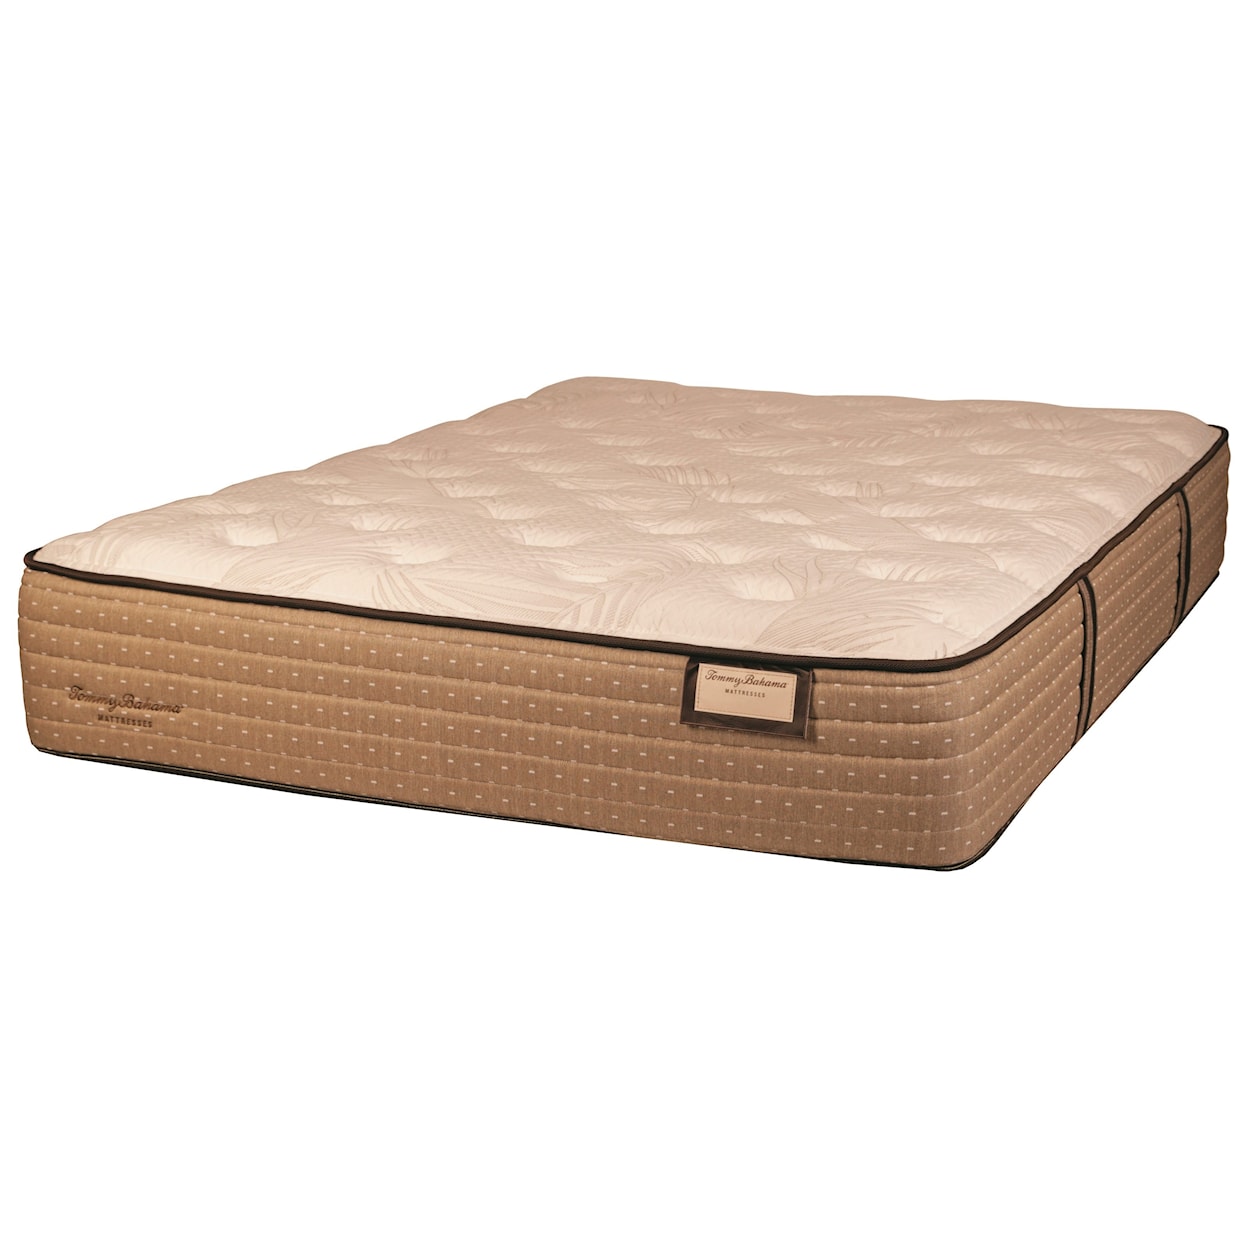 Therapedic Tommy Bahama Shake the Sand Firm 6034 King Firm Luxury Mattress